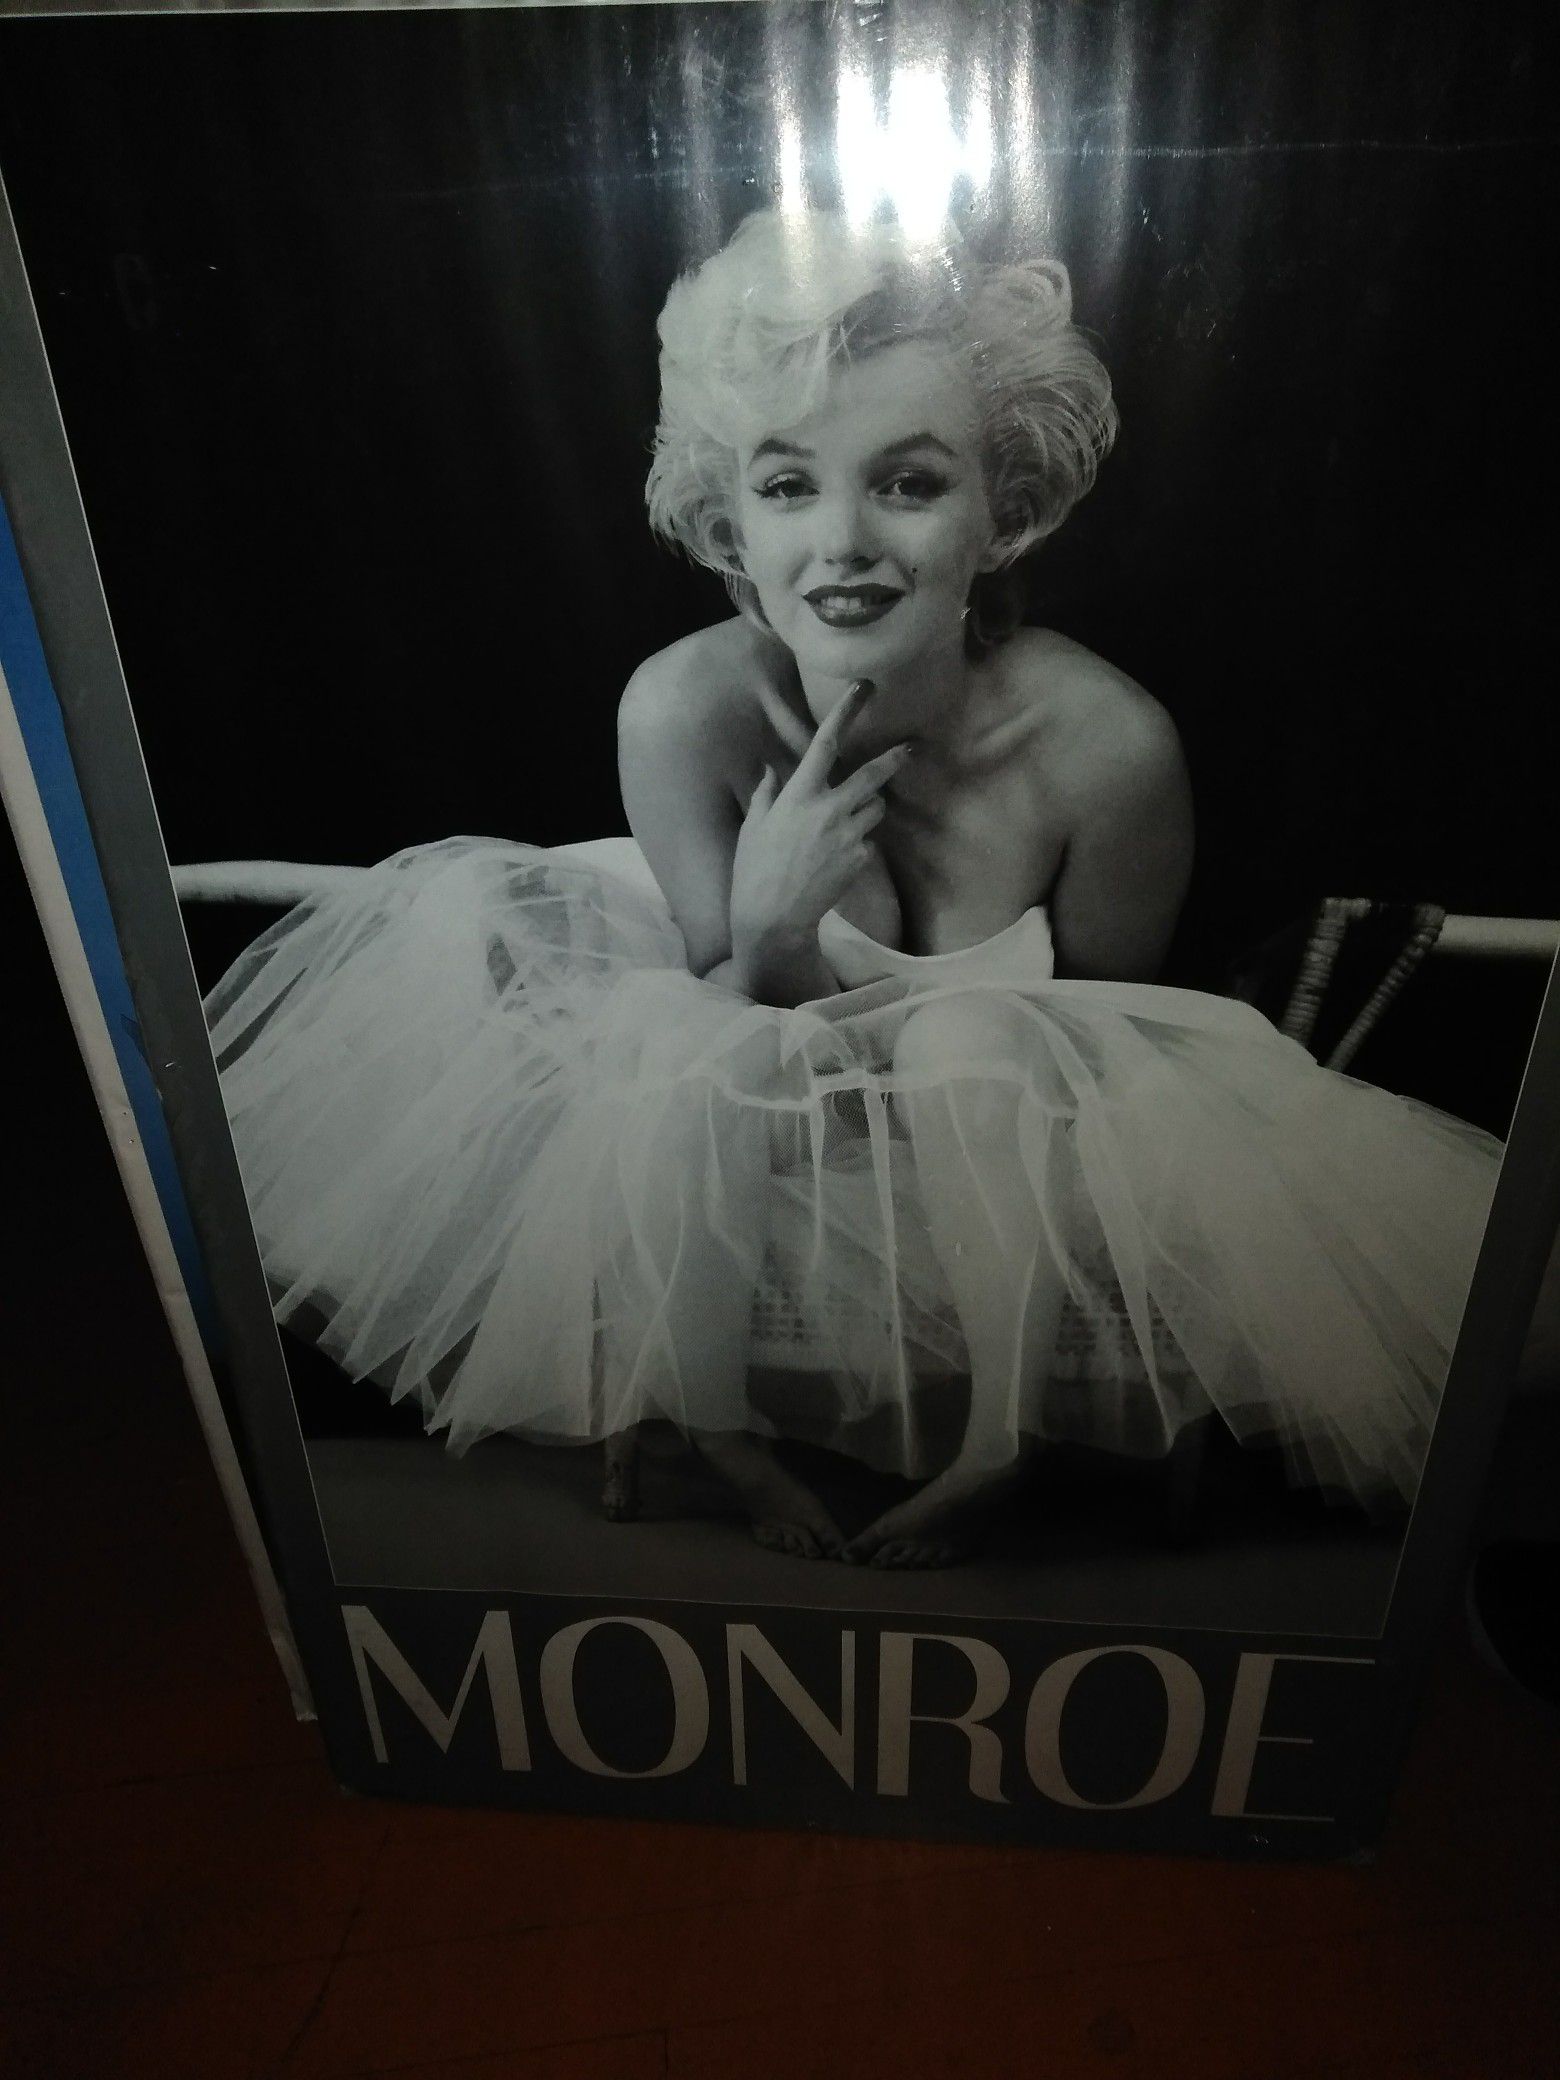 Big picture of Marilyn Monroe